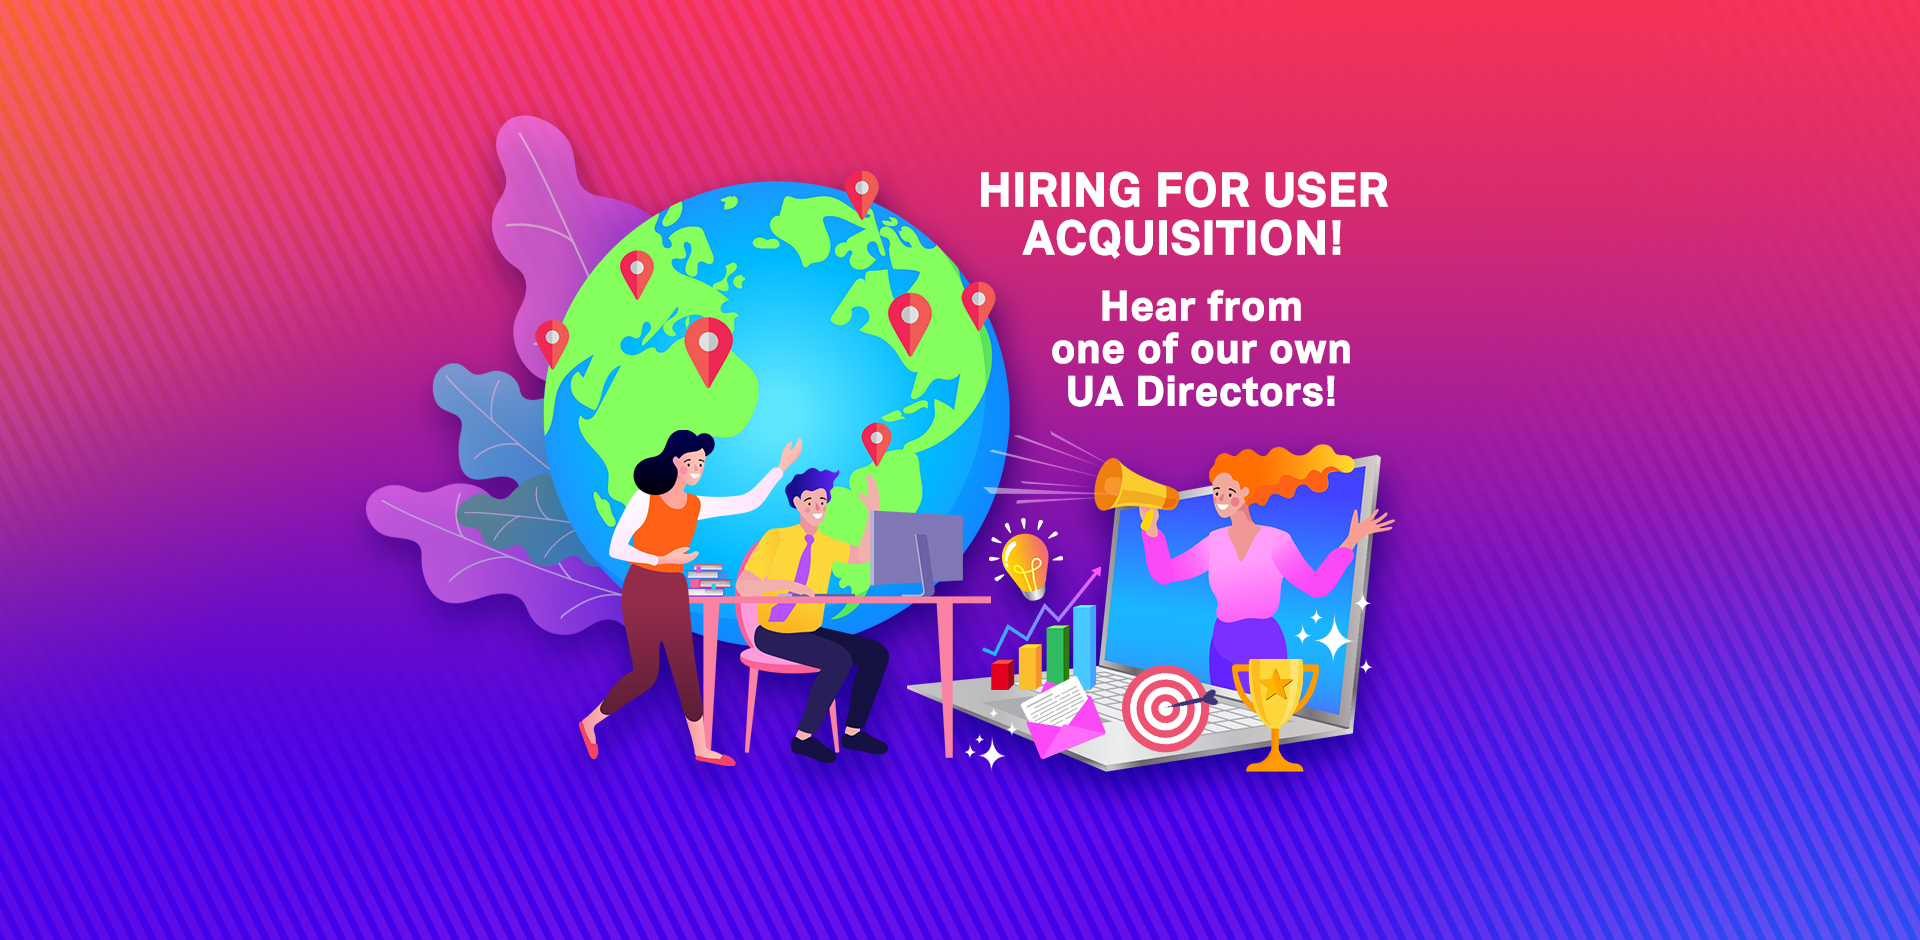 Hiring for User Acquisition!